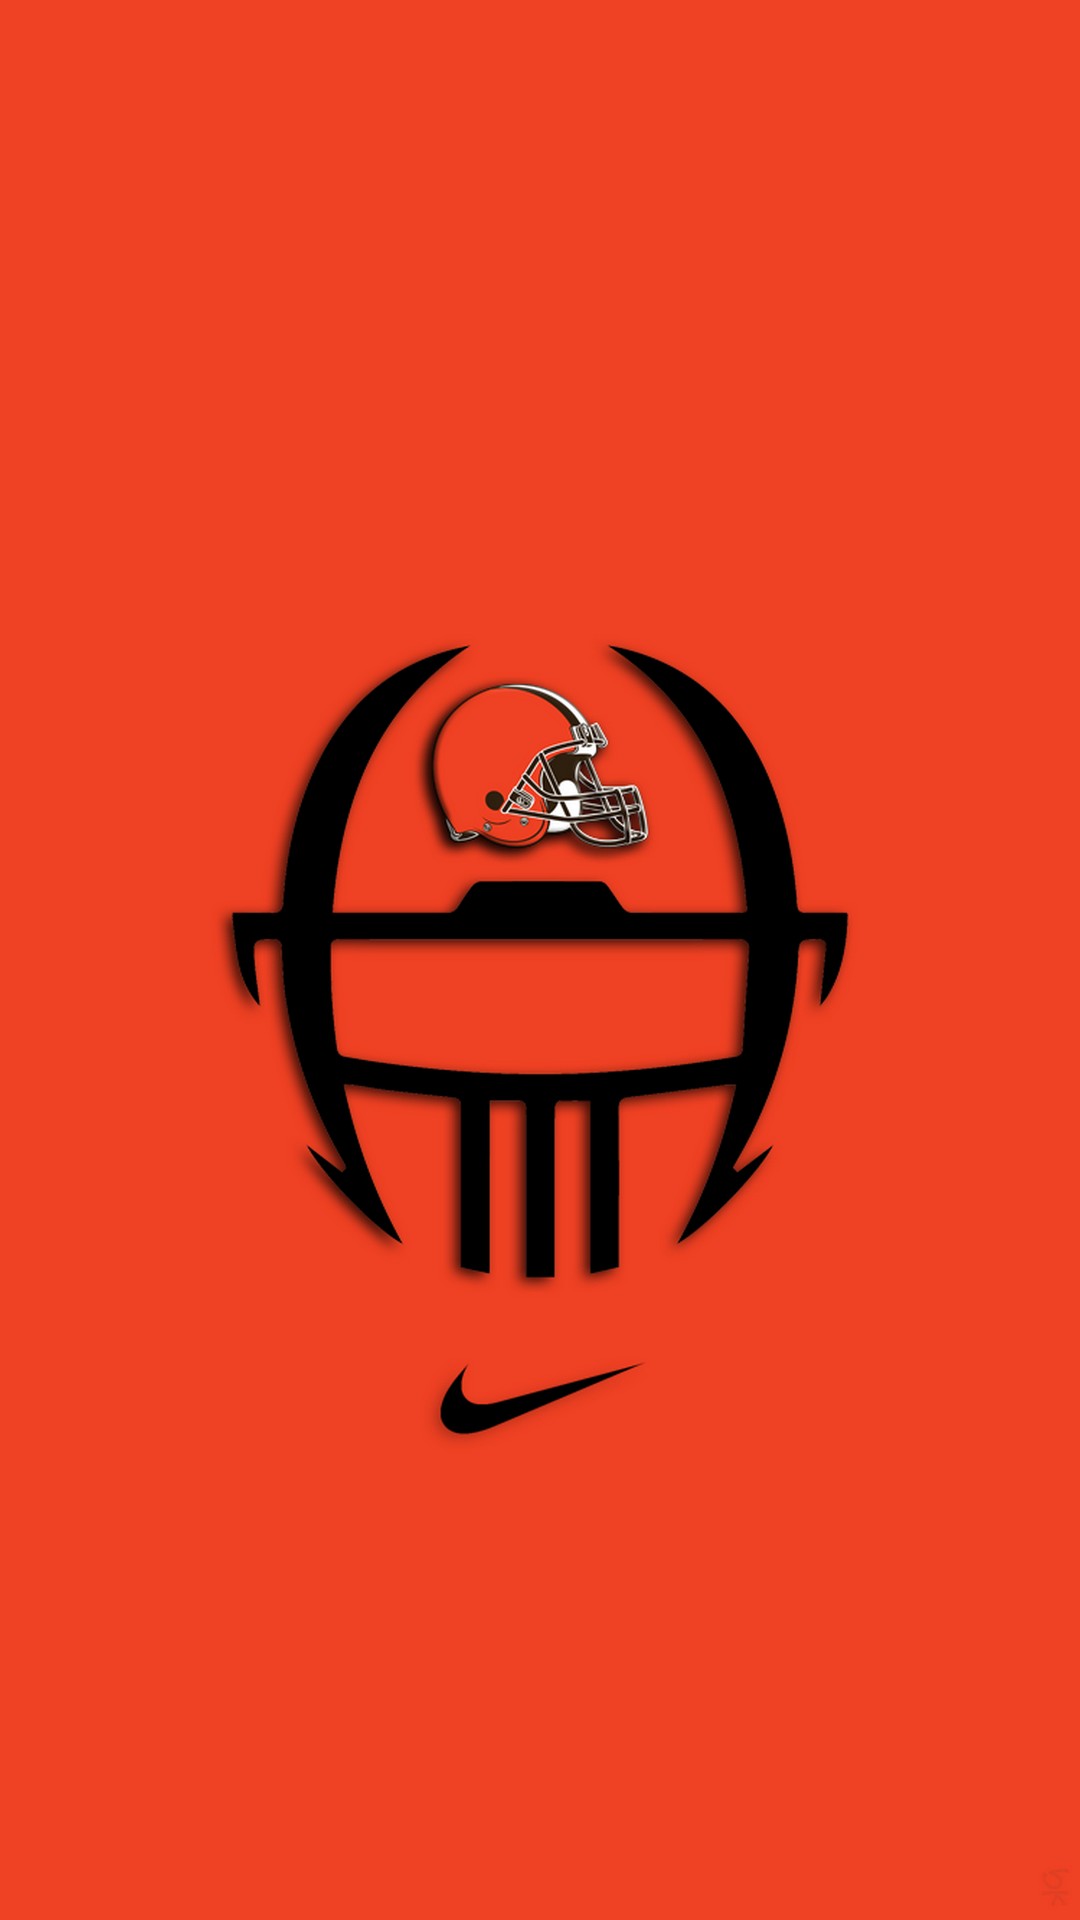 Cleveland Browns iPhone 8 Wallpaper With high-resolution 1080X1920 pixel. Download and set as wallpaper for Apple iPhone X, XS Max, XR, 8, 7, 6, SE, iPad, Android